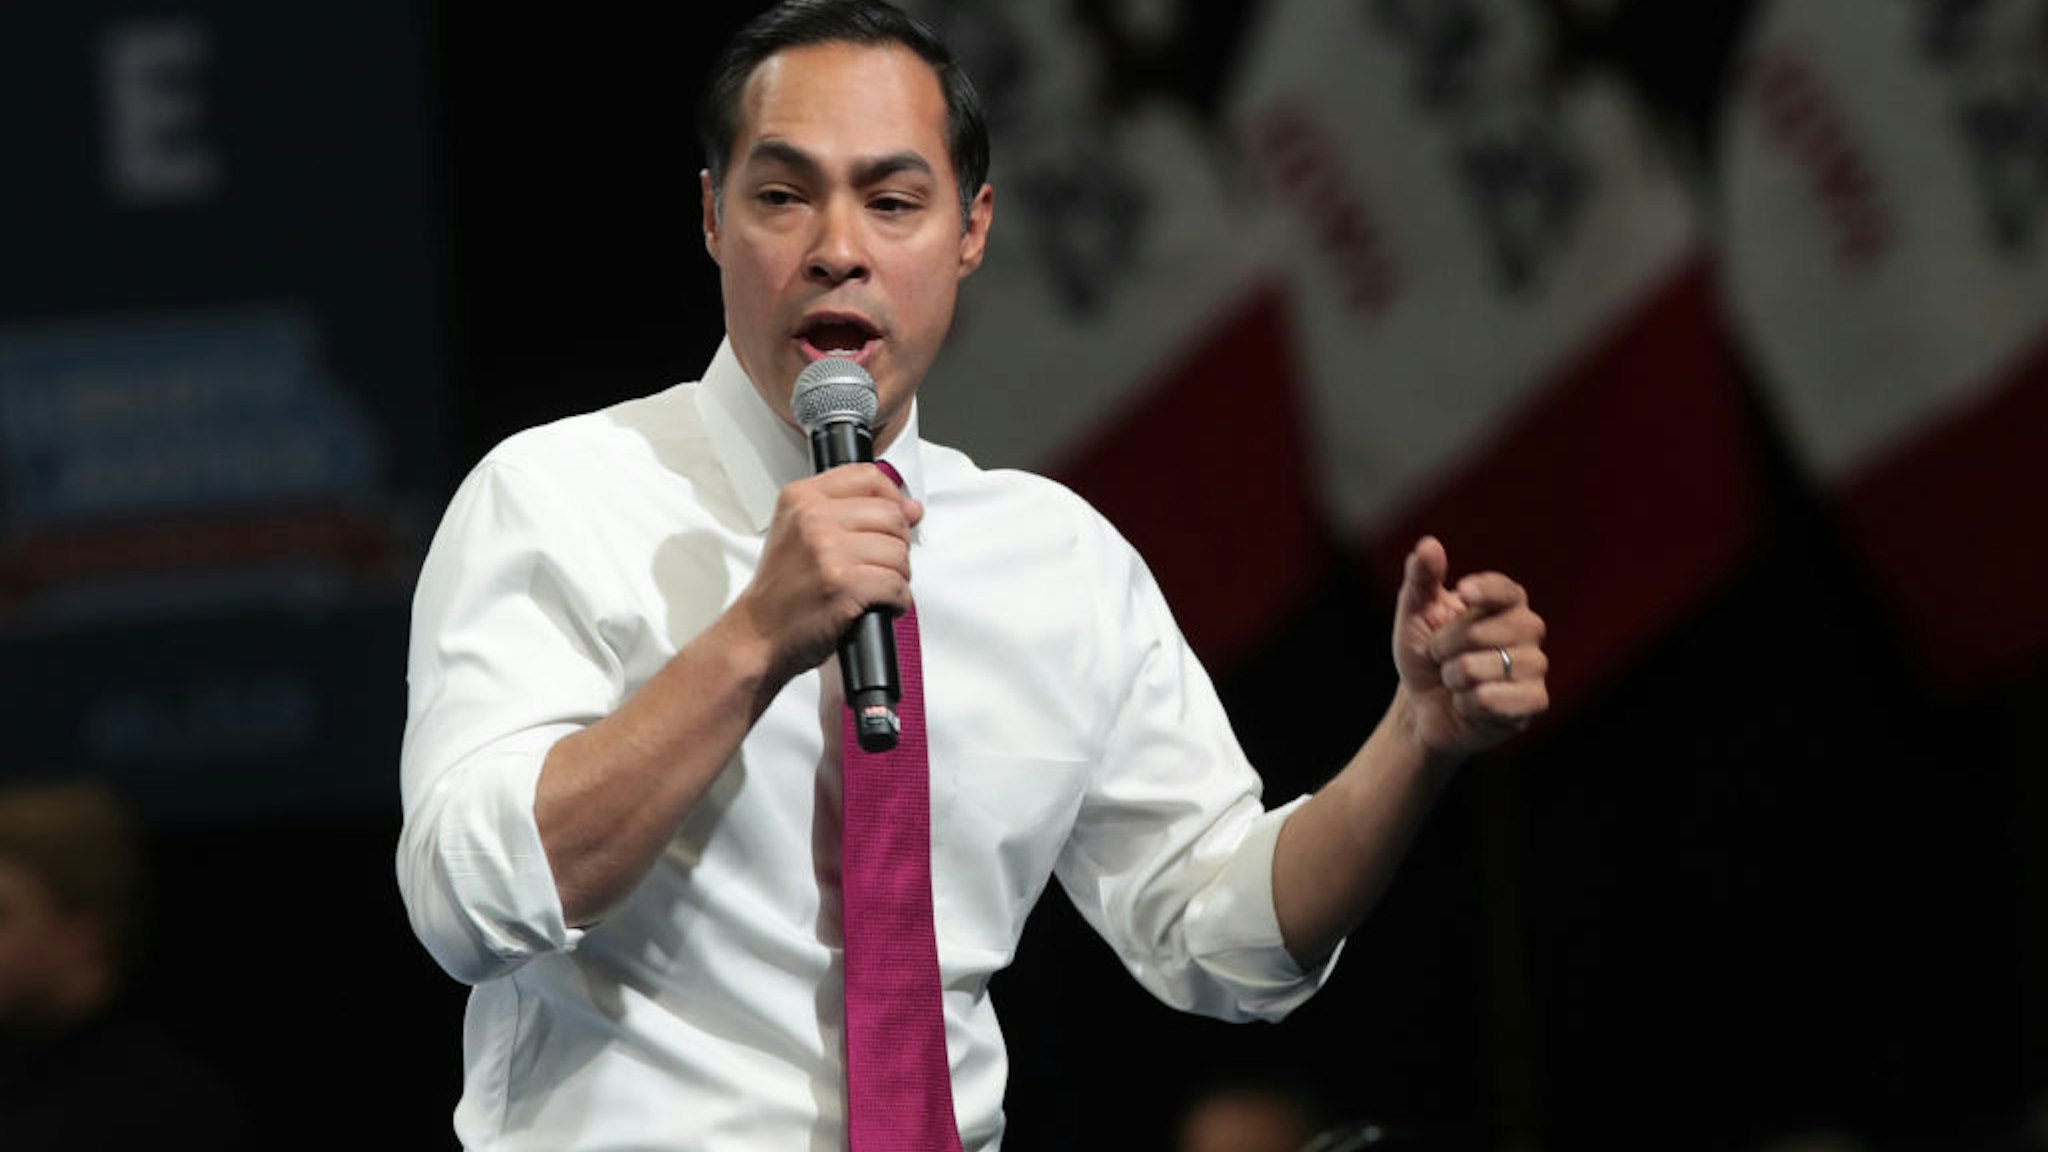 Julián Castro speaks at the Liberty and Justice Celebration at the Wells Fargo Arena